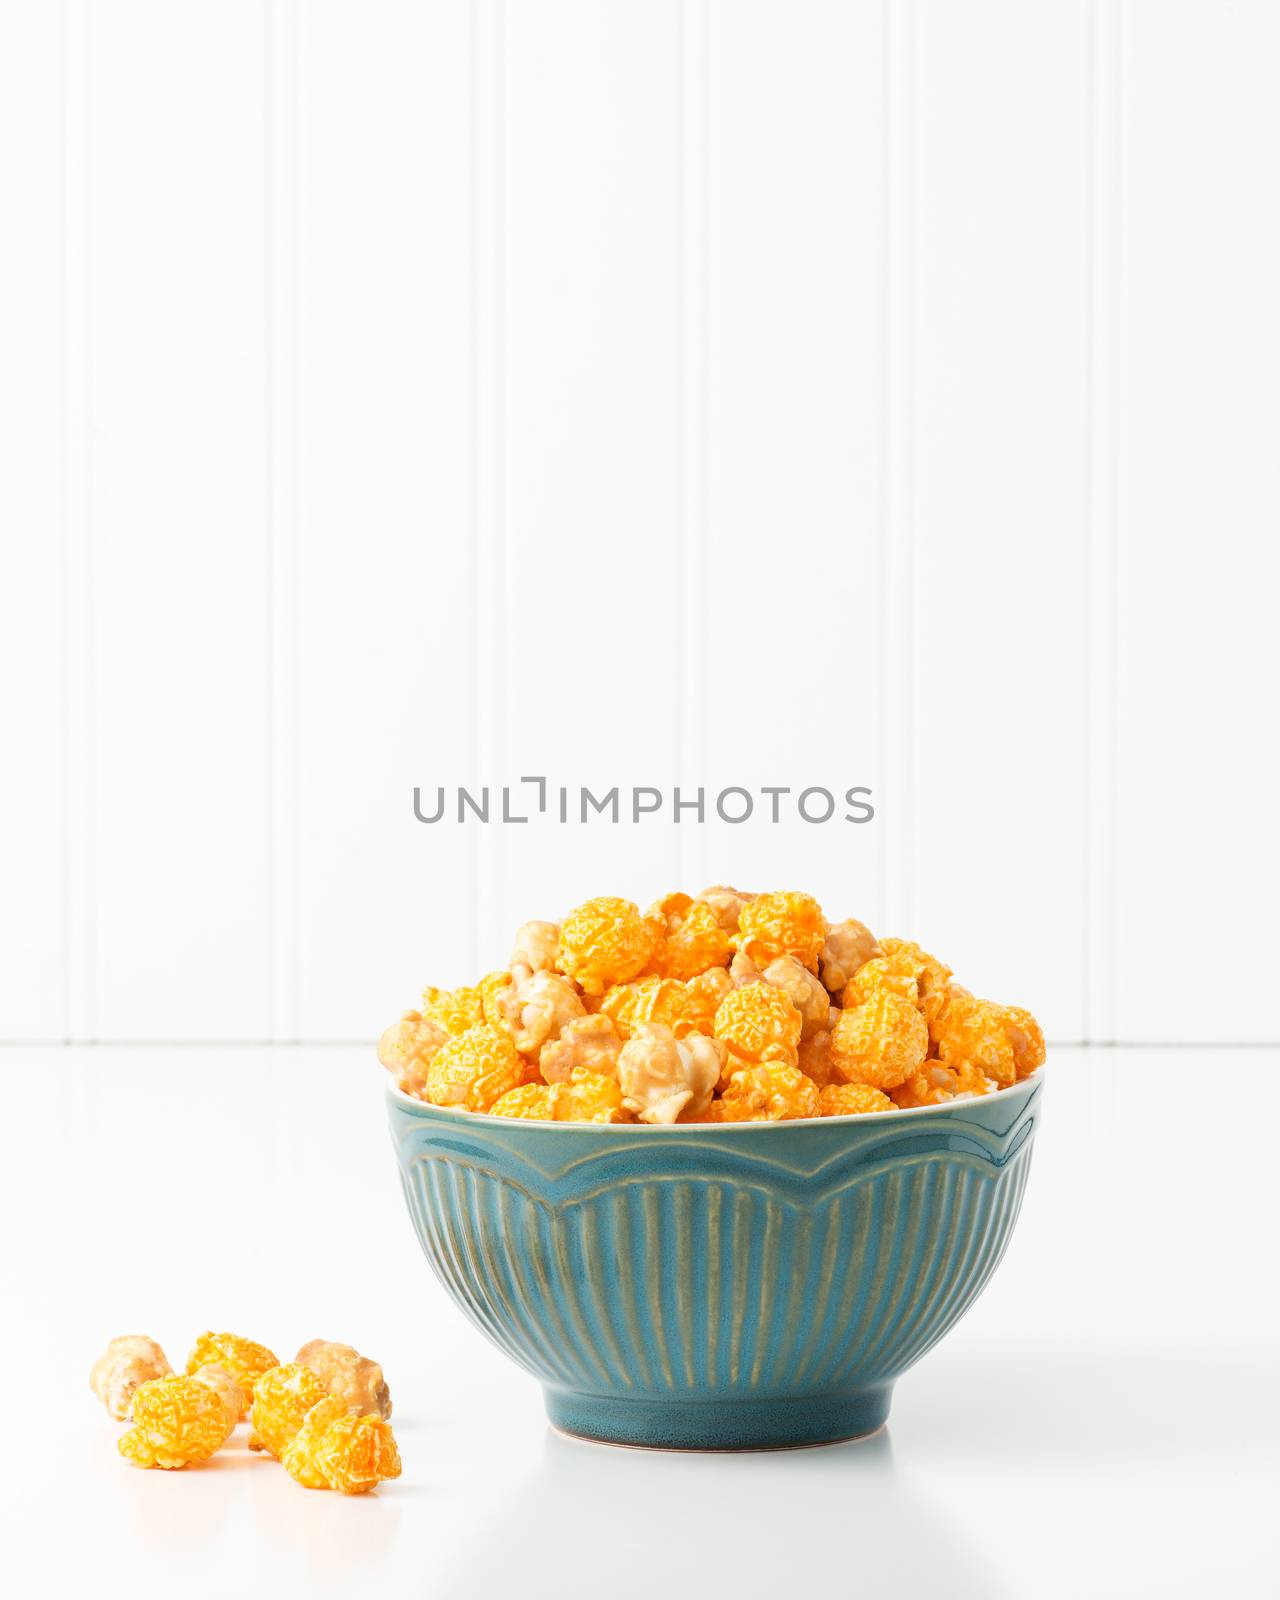 Chicago Mix Popcorn by billberryphotography